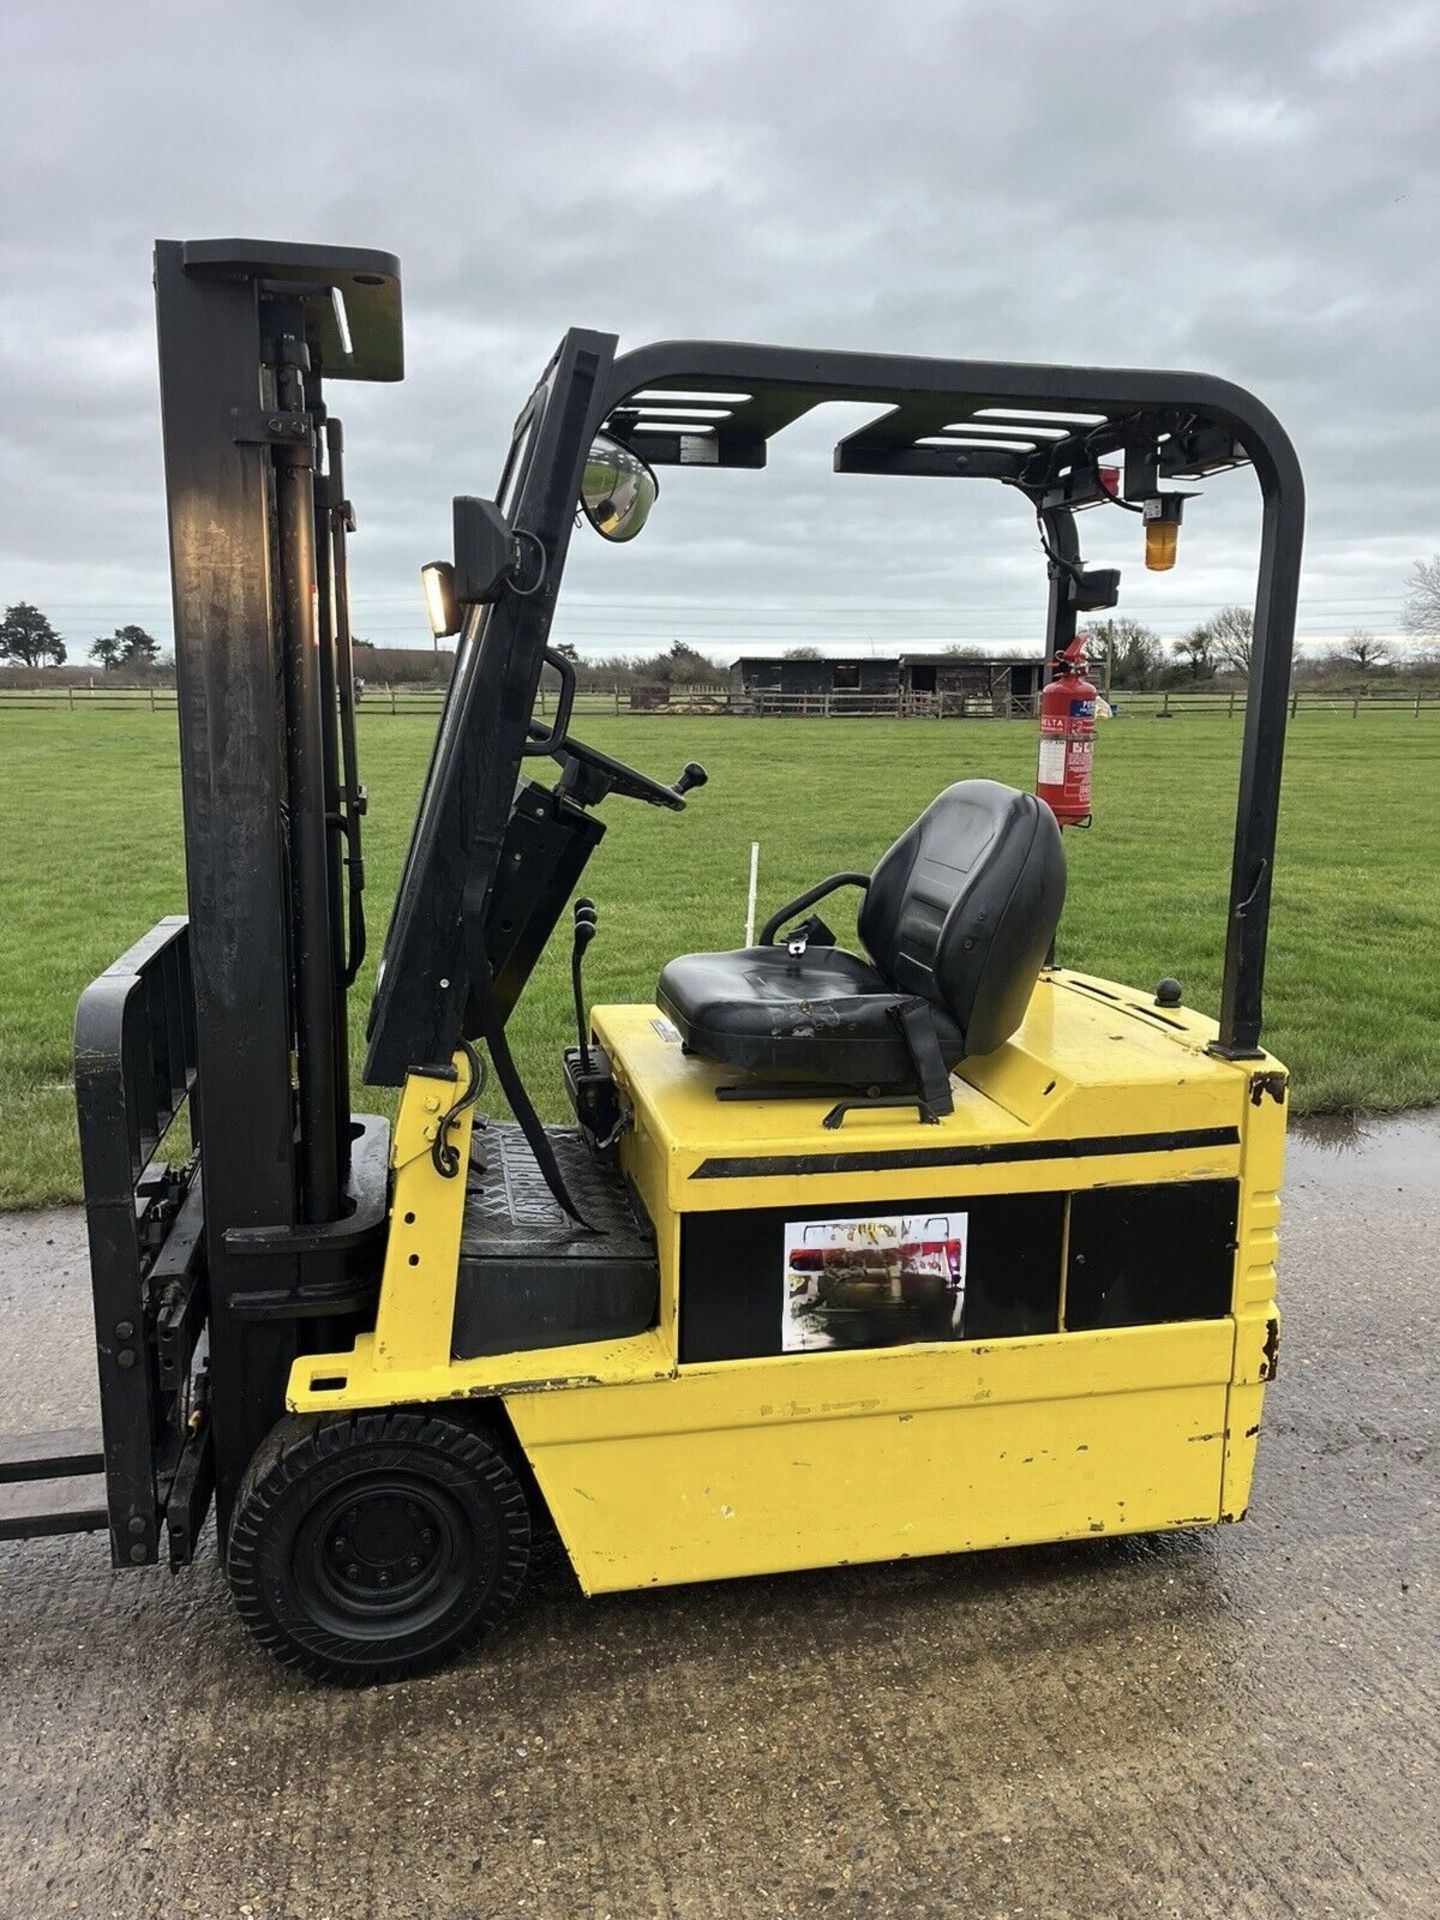 CATERPILLAR 1.8 Electric Forklift Truck (Container Spec) - Image 6 of 6